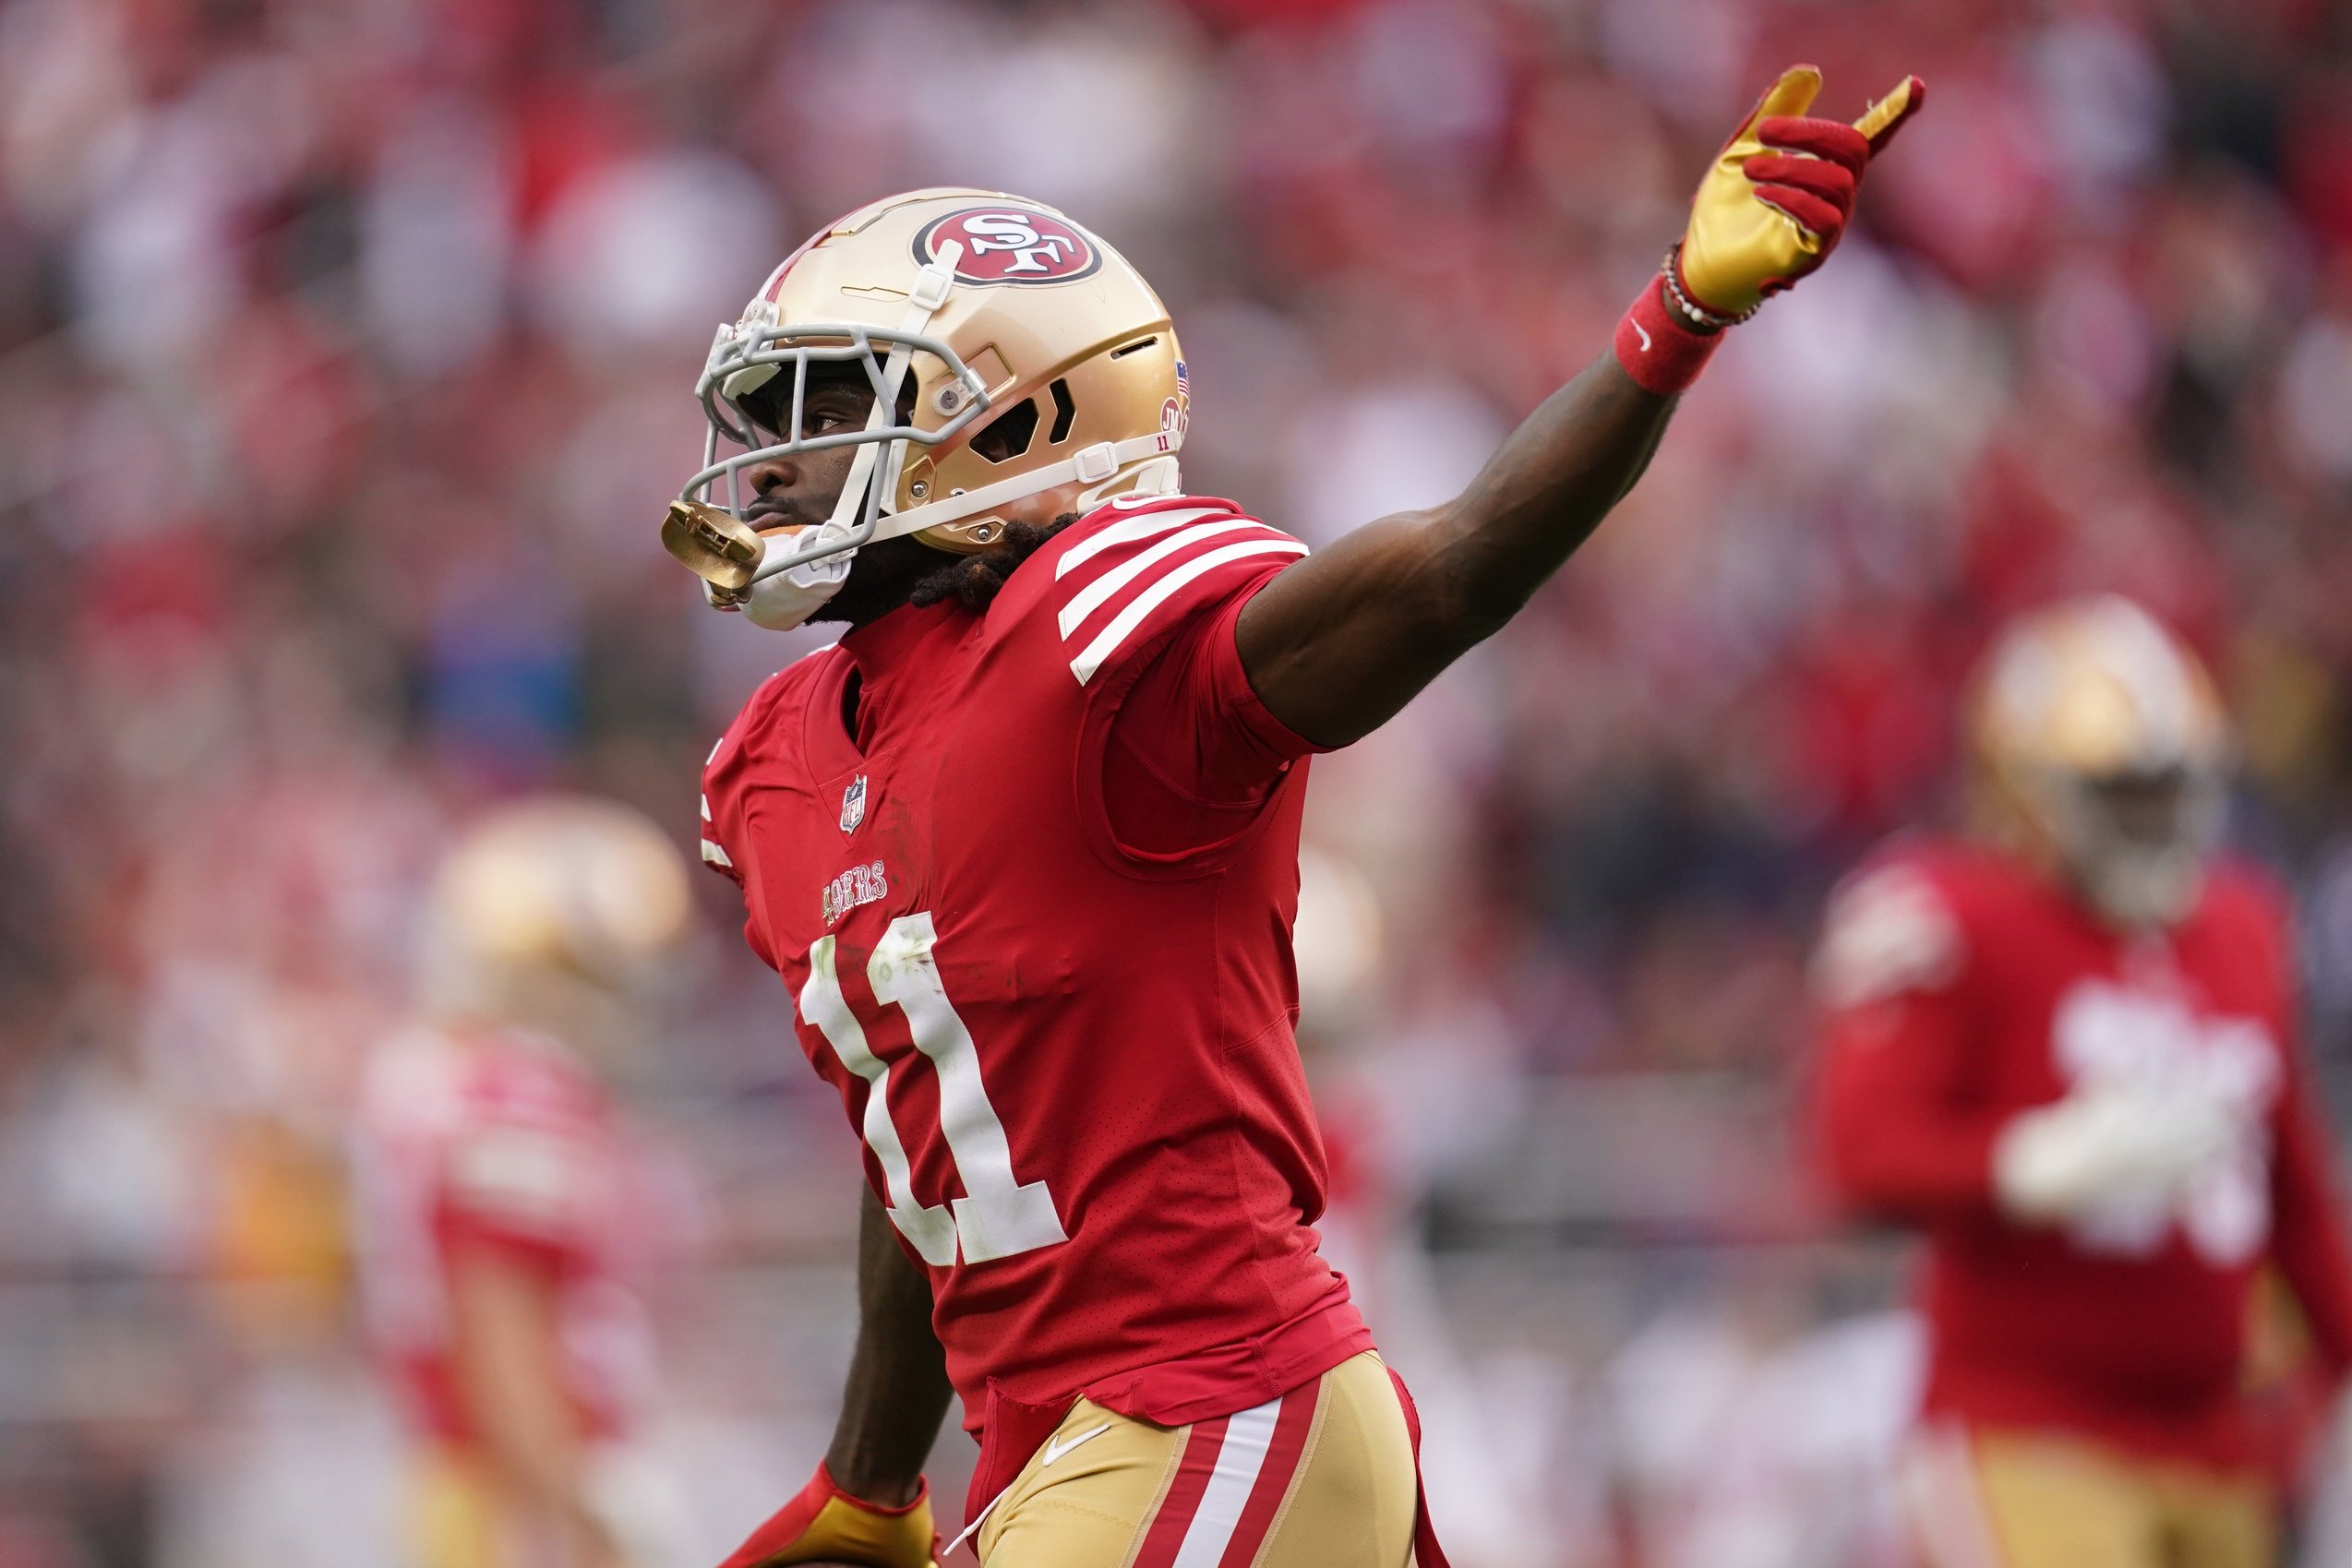 San Francisco 49ers wide receiver Brandon Aiyuk (11) celebrates after catching a touchdown pass against the Tampa Bay Buccaneers in the second quarter at Levi's Stadium. Mandatory Credit: Cary Edmondson-USA TODAY Sports